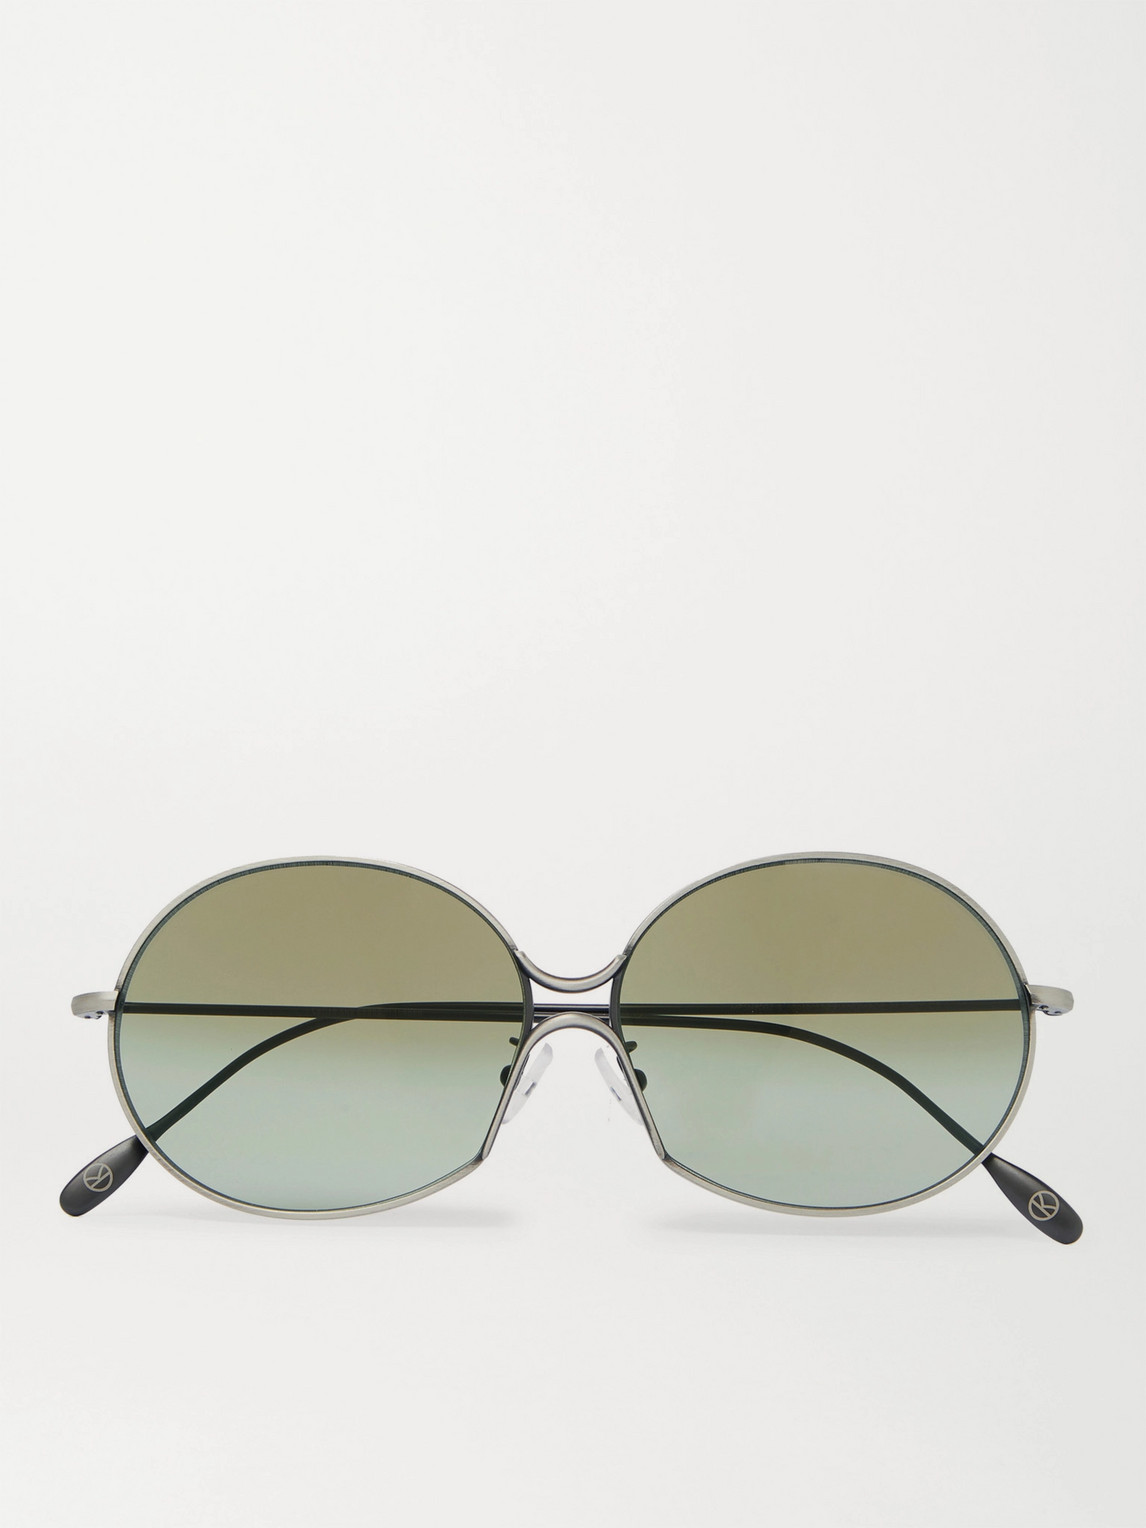 Kingsman Cutler And Gross Round-frame Silver-tone Metal Sunglasses